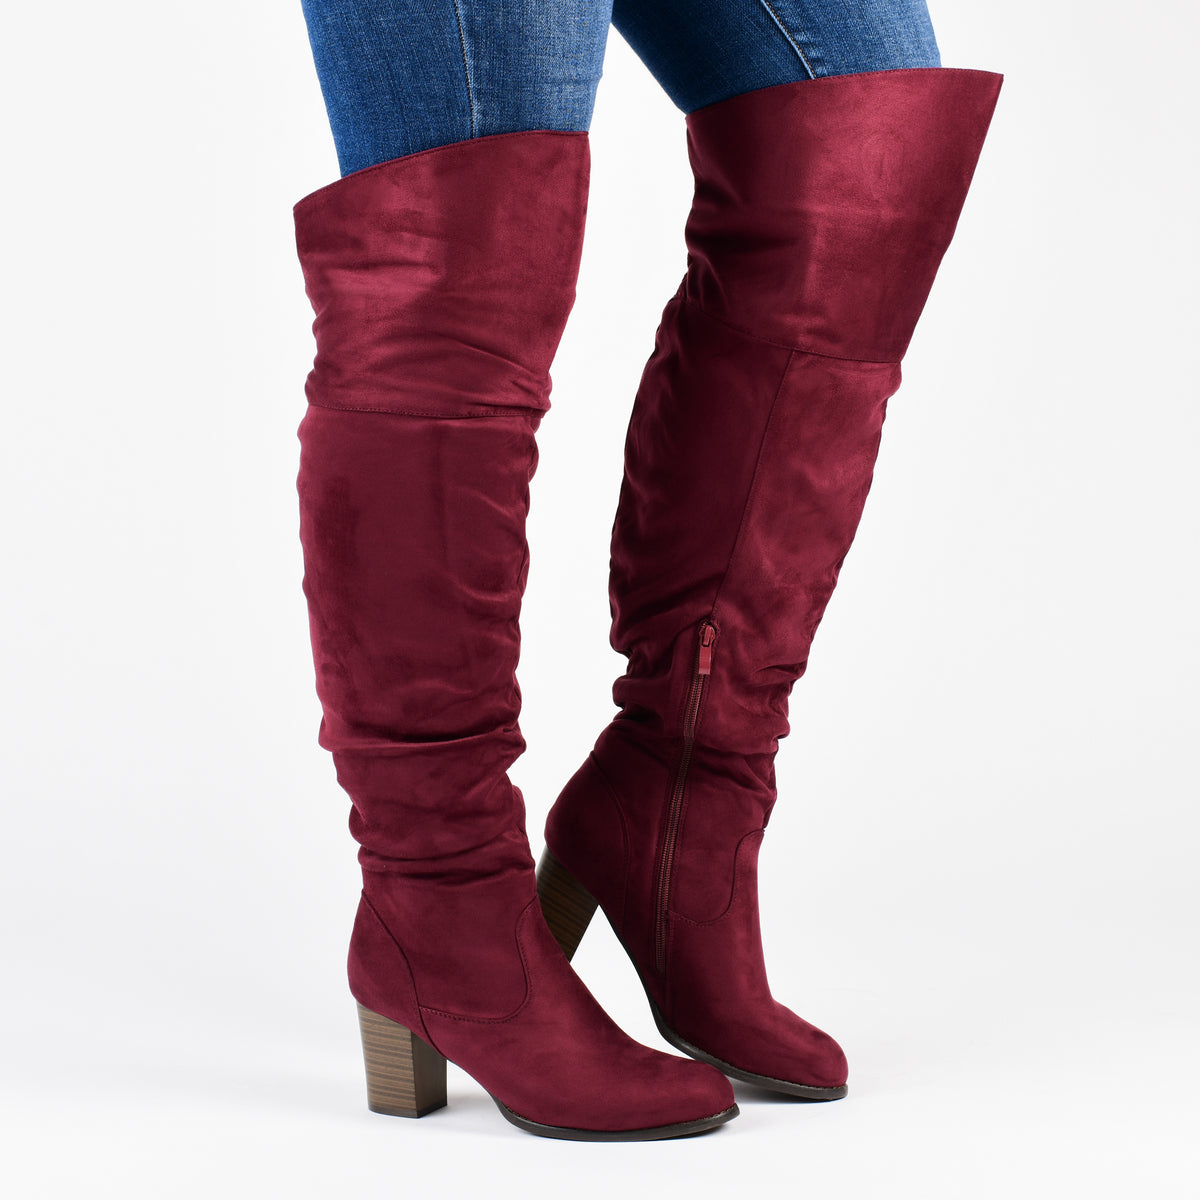 Kaison Boot | Women's Over the Knee Boot – Journee Collection